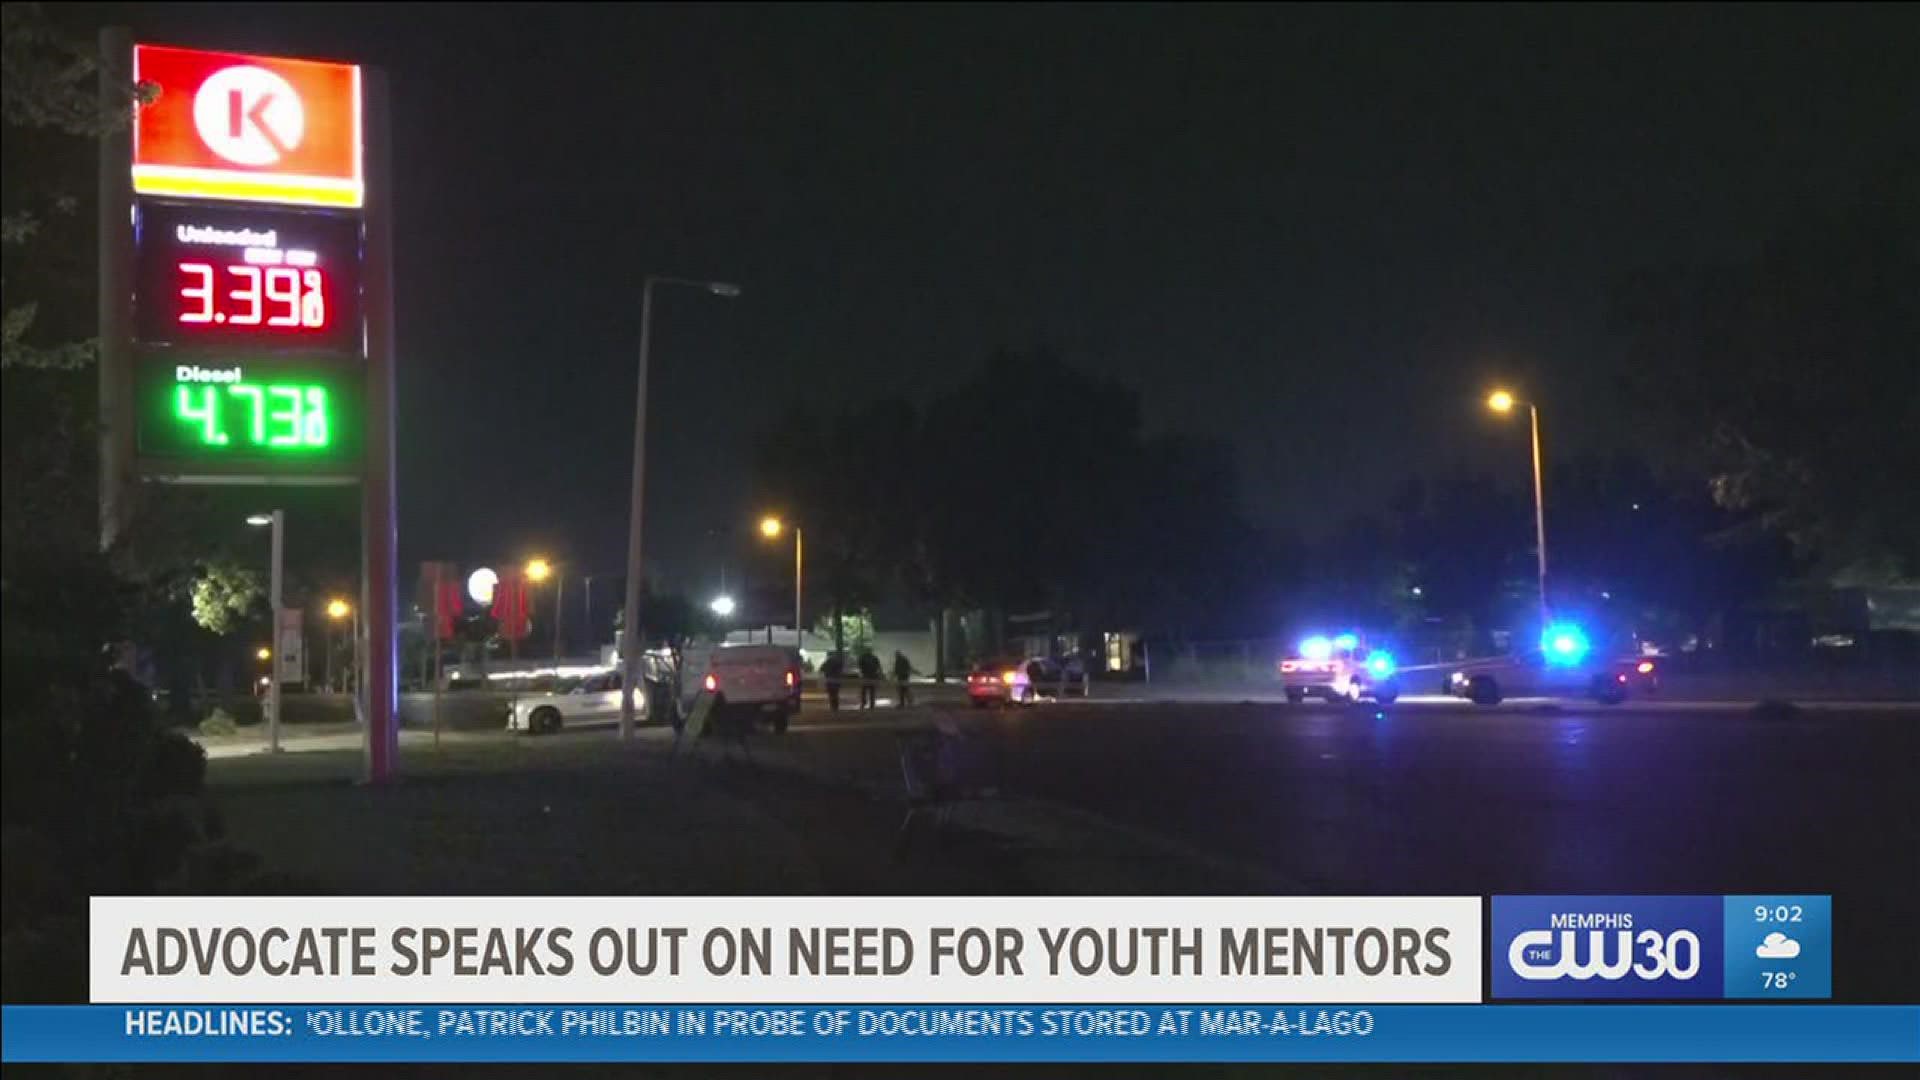 One community advocate is sounding the alarm and calling for more mentors to come forward.